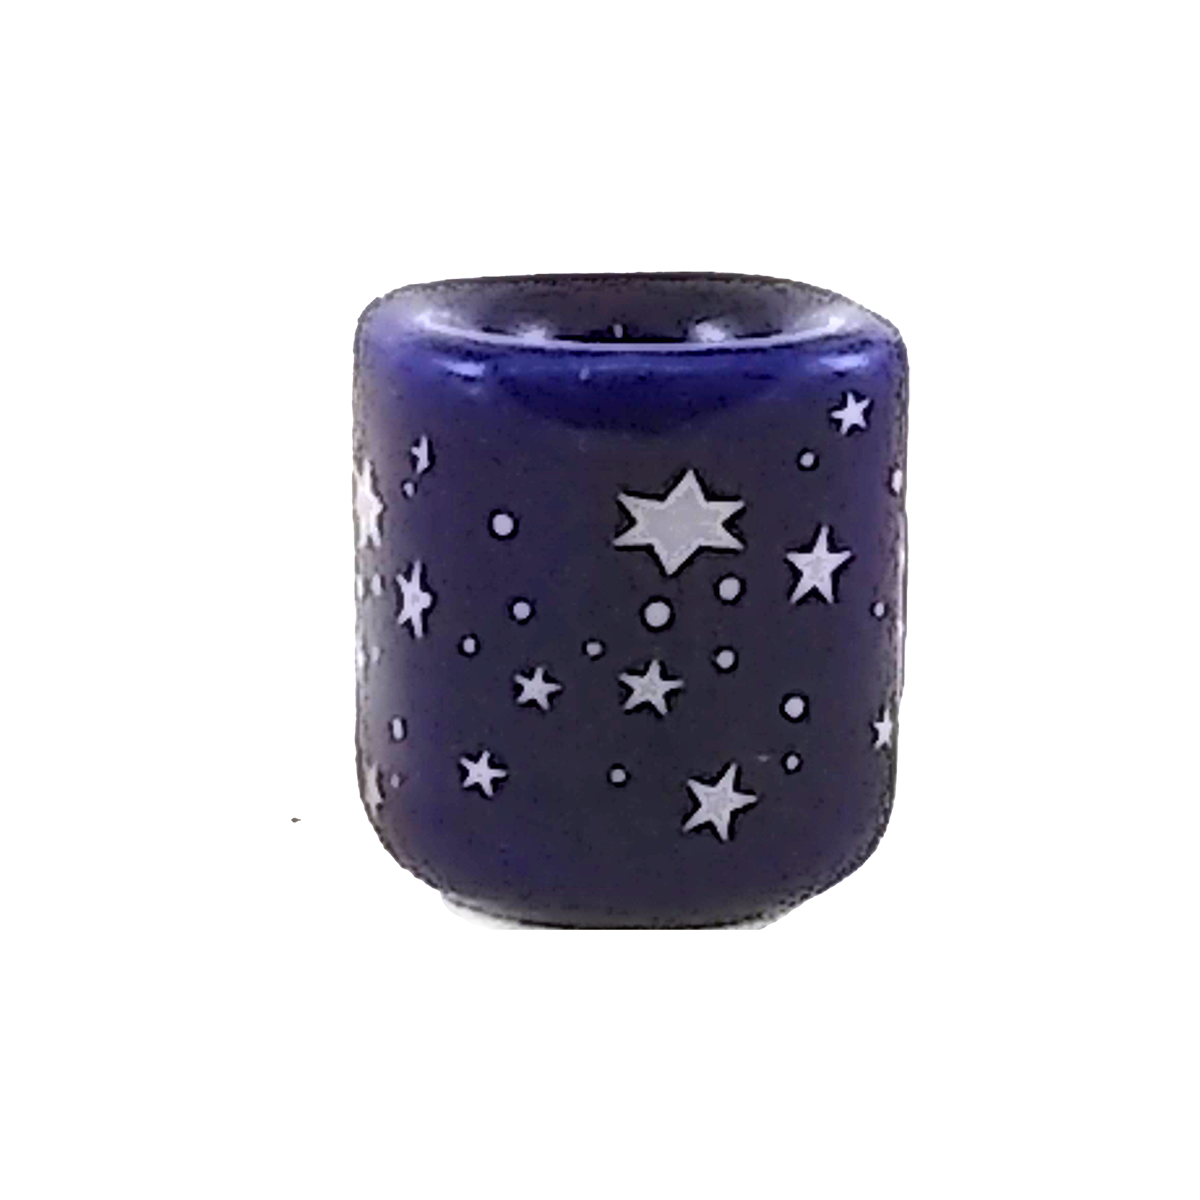 Blue chime candle holder with silver stars